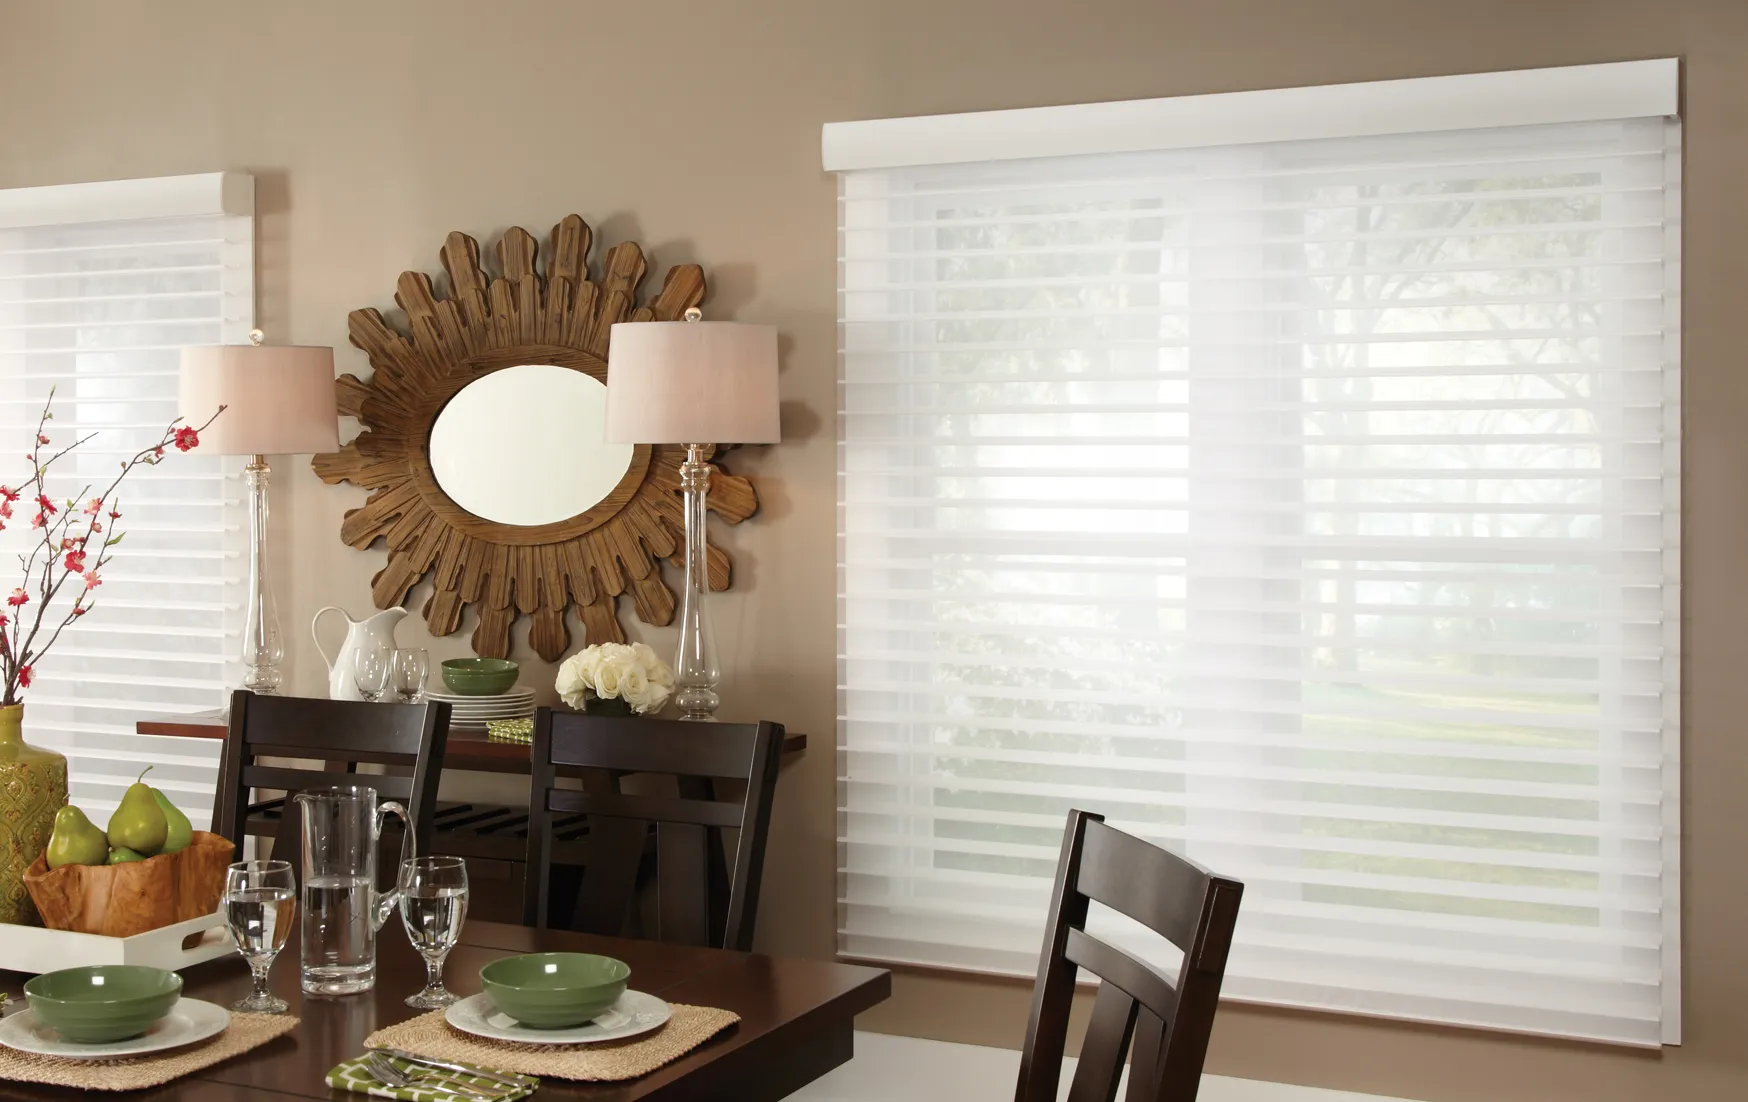 Horizontal sheer blinds filter sunlight while maintaining an outside view in dining room setting.